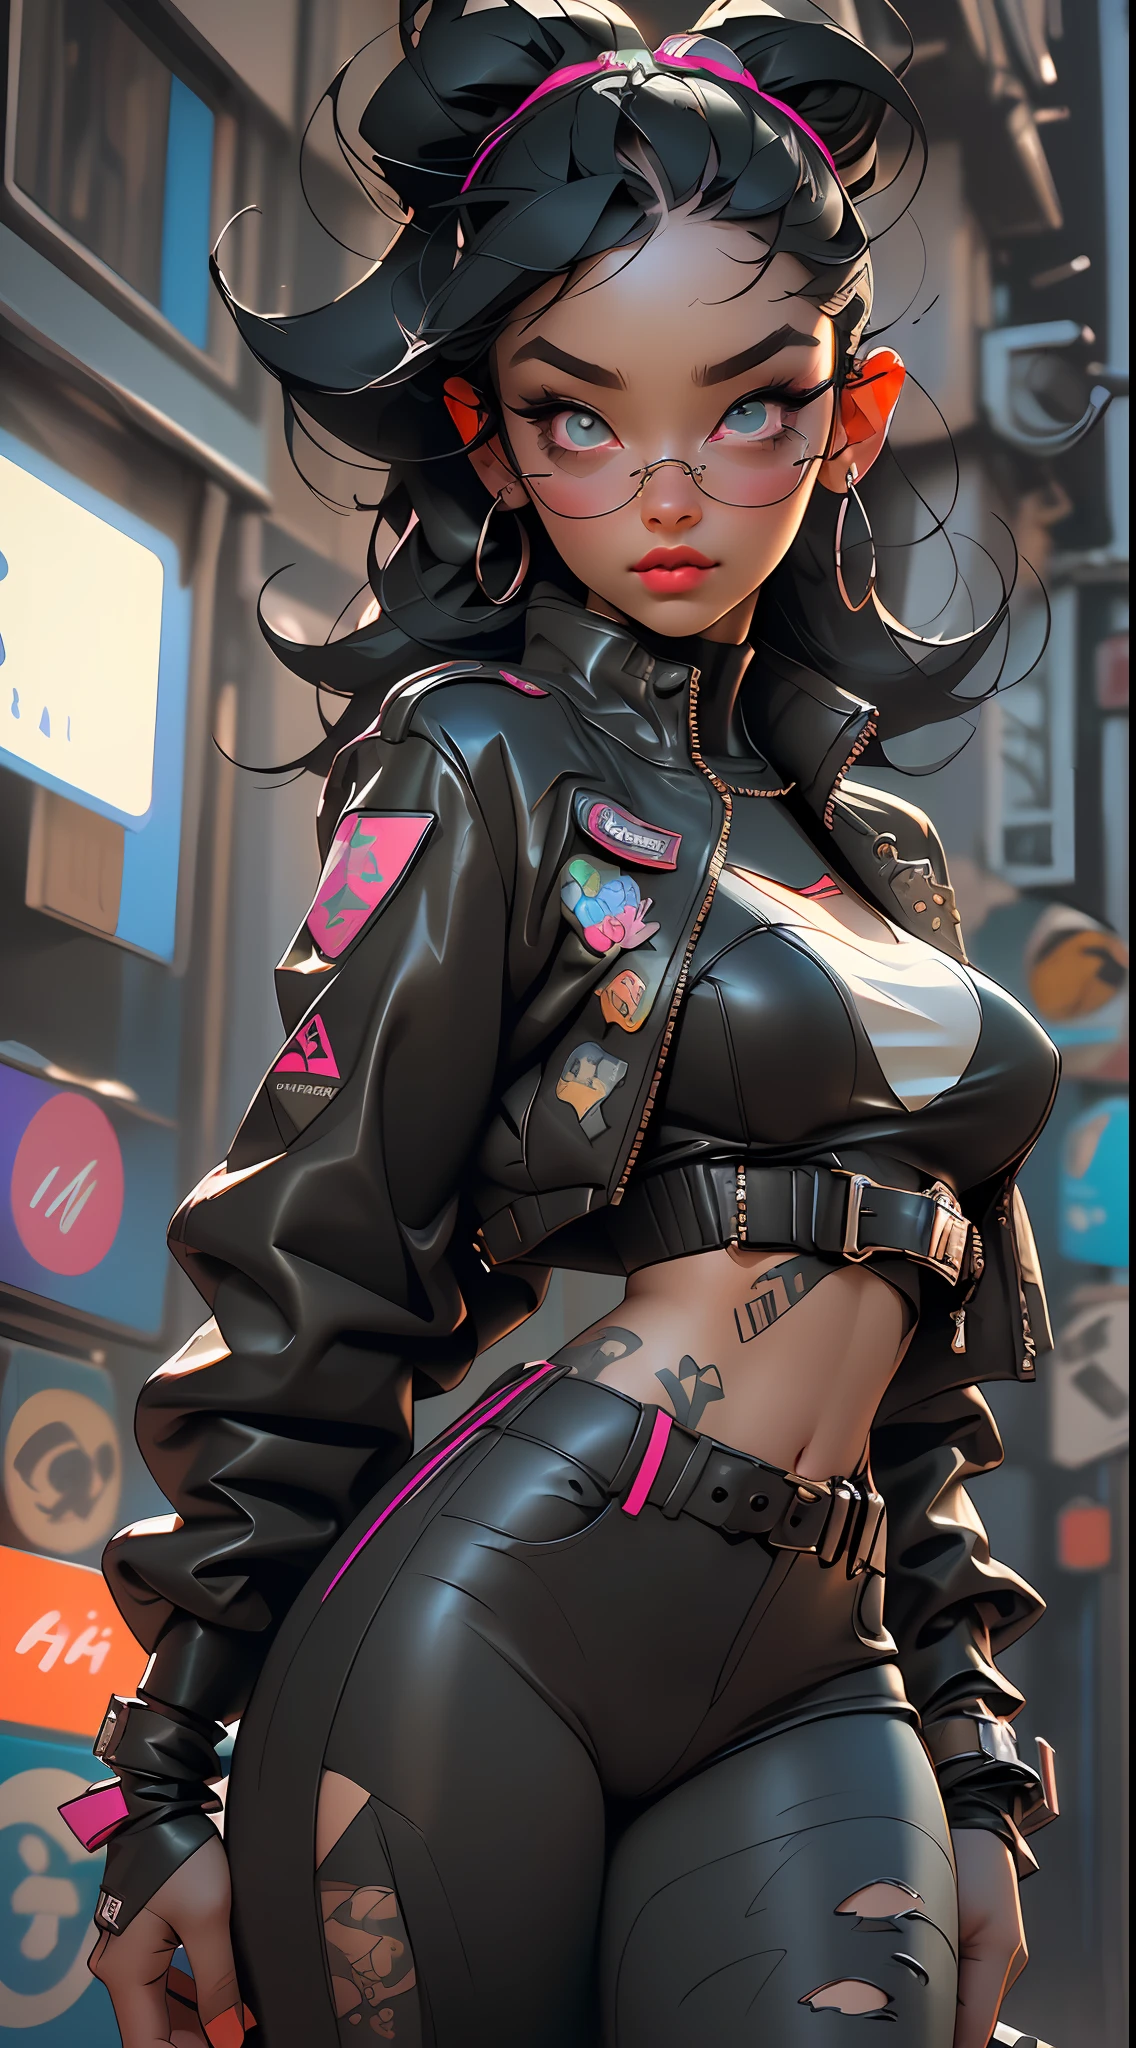 ((Best Quality)), ((Masterpiece)), ((Realistic)) and ultra-detailed photography of a 1nerdy girl with goth and neon colors. She has ((black hair)), wears a army jacket and exudes a vibe ((beautiful and aesthetic)), sexy, underboobs, hot , driving a awesome motorbike ,((perfect eyes))